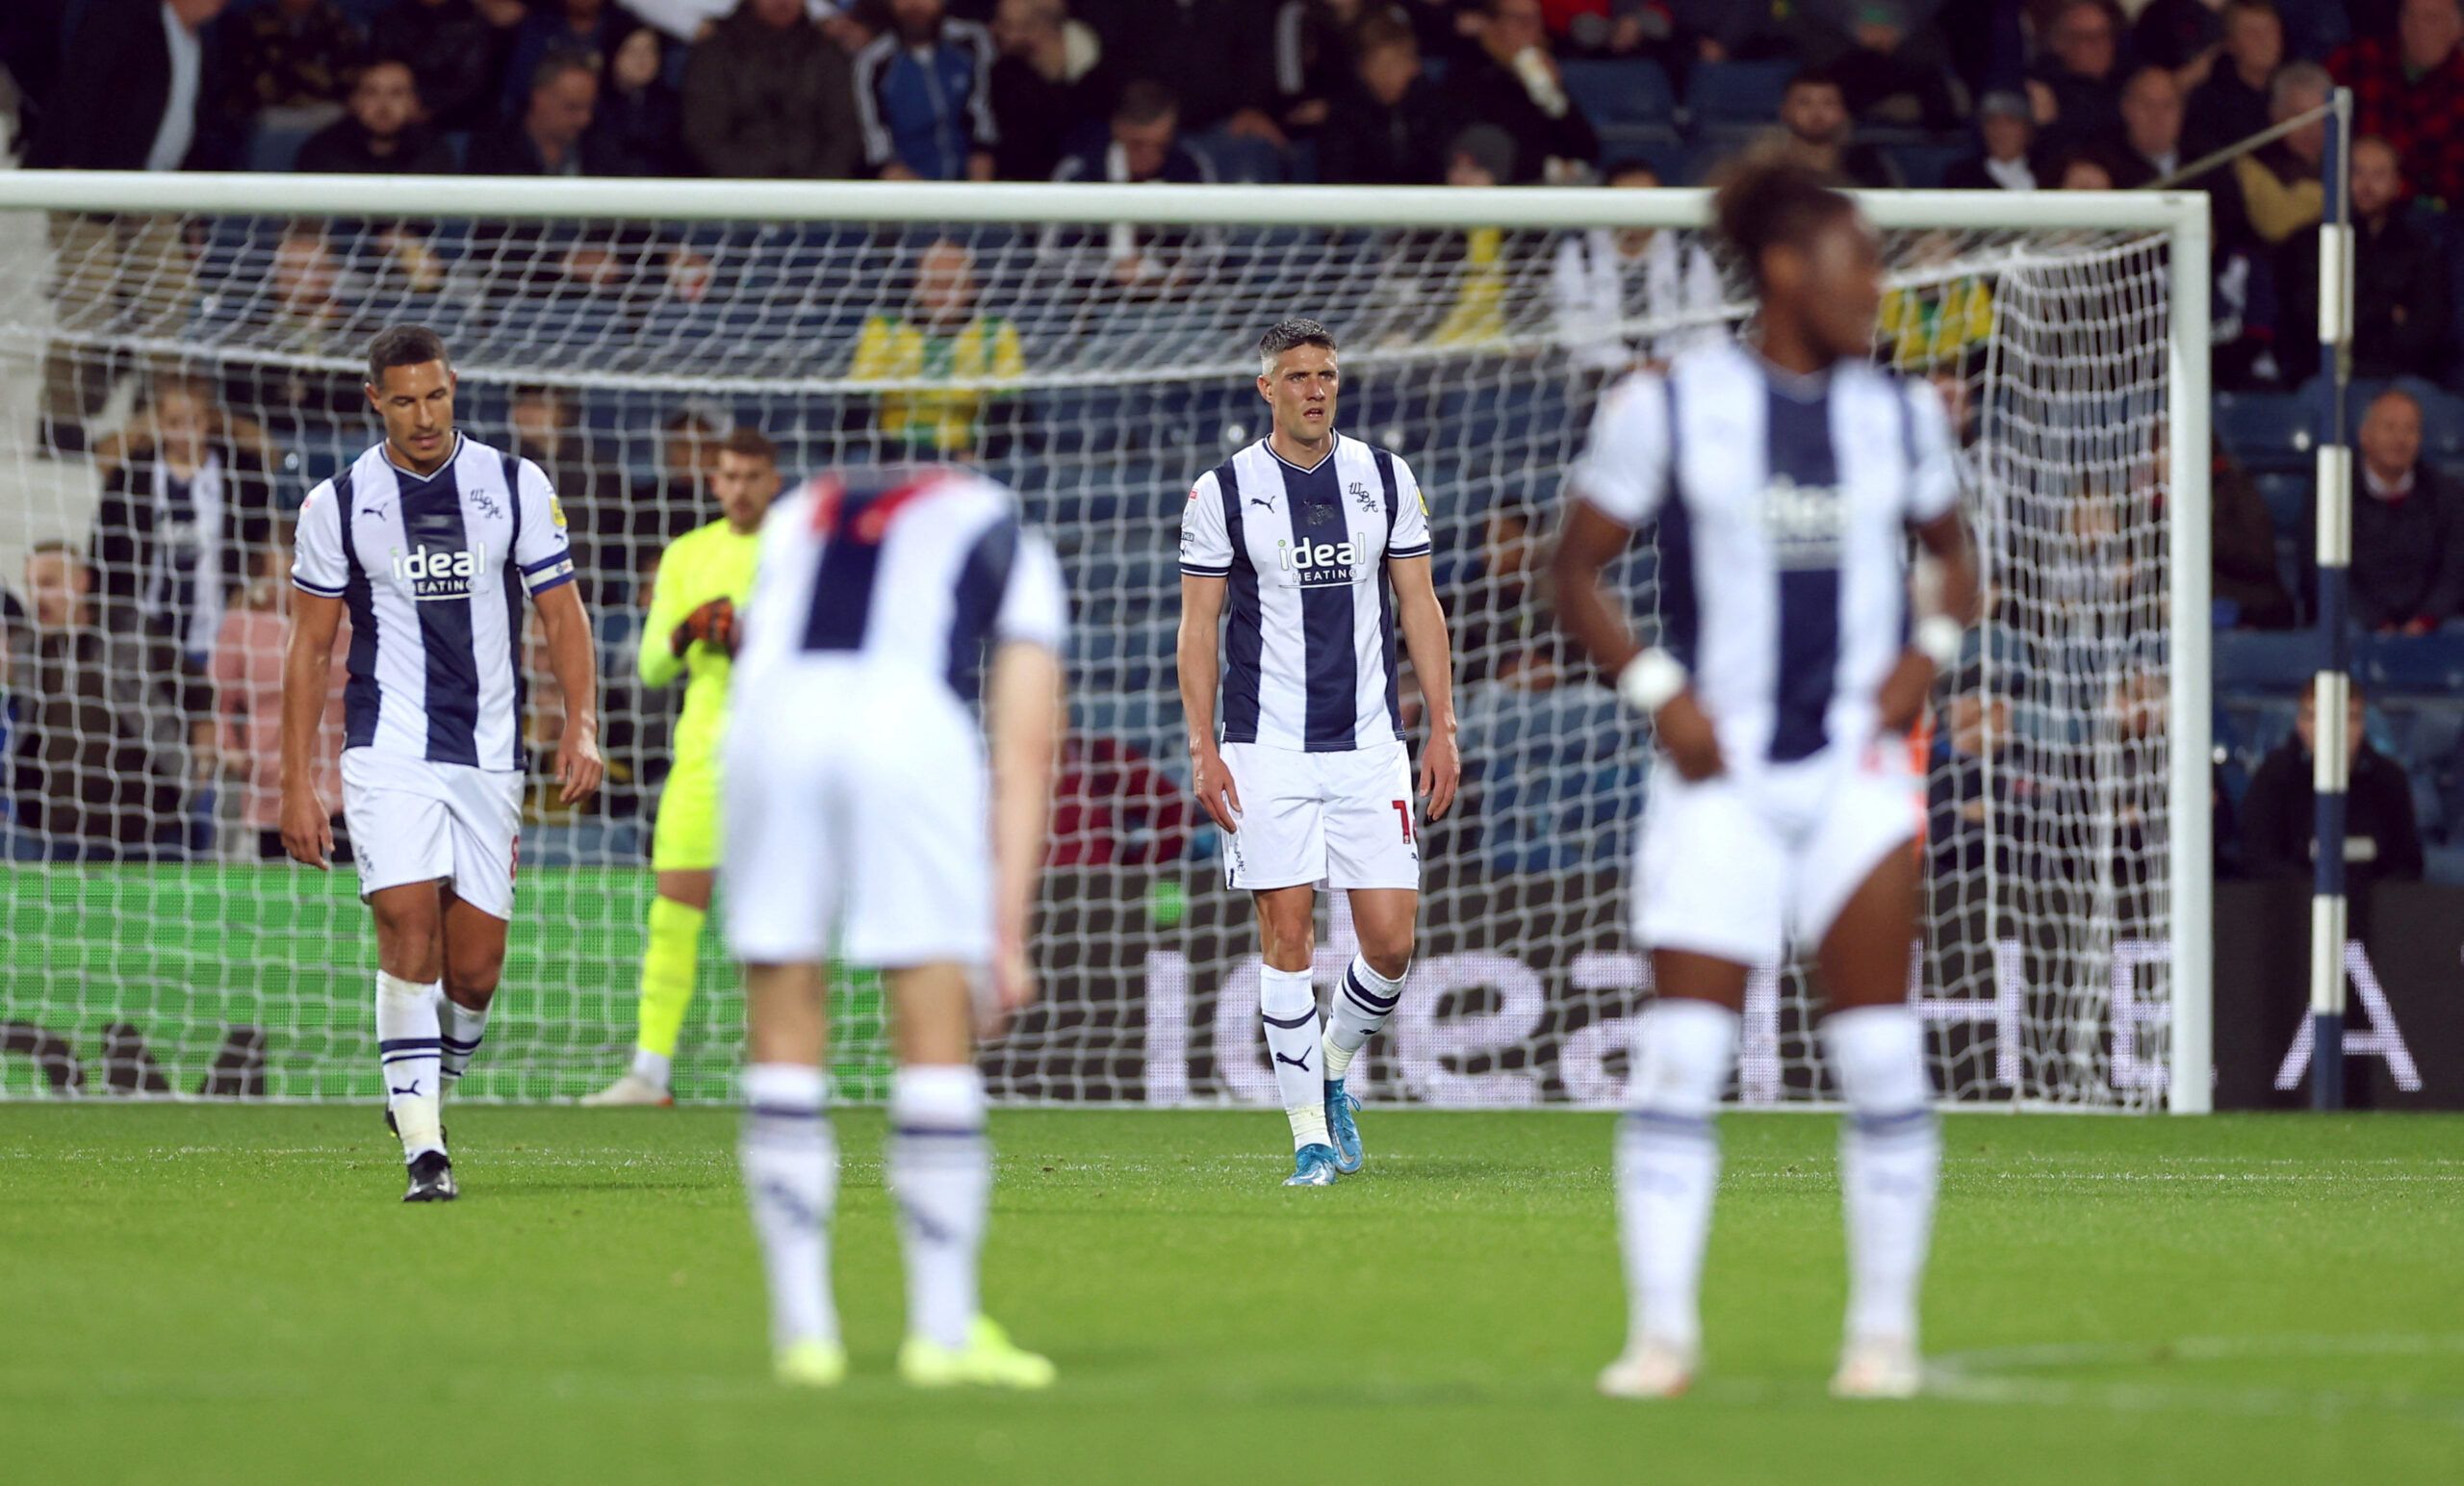 Soccer Football - West Bromwich Albion v Bristol City - The Hawthorns, West Bromwich, Britain - October 18, 2022 West Bromwich Albion's Martin Kelly reacts after Bristol City's Joe Williams scored their first goal     Action Images/Andrew Boyers  EDITORIAL USE ONLY. No use with unauthorized audio, video, data, fixture lists, club/league logos or 